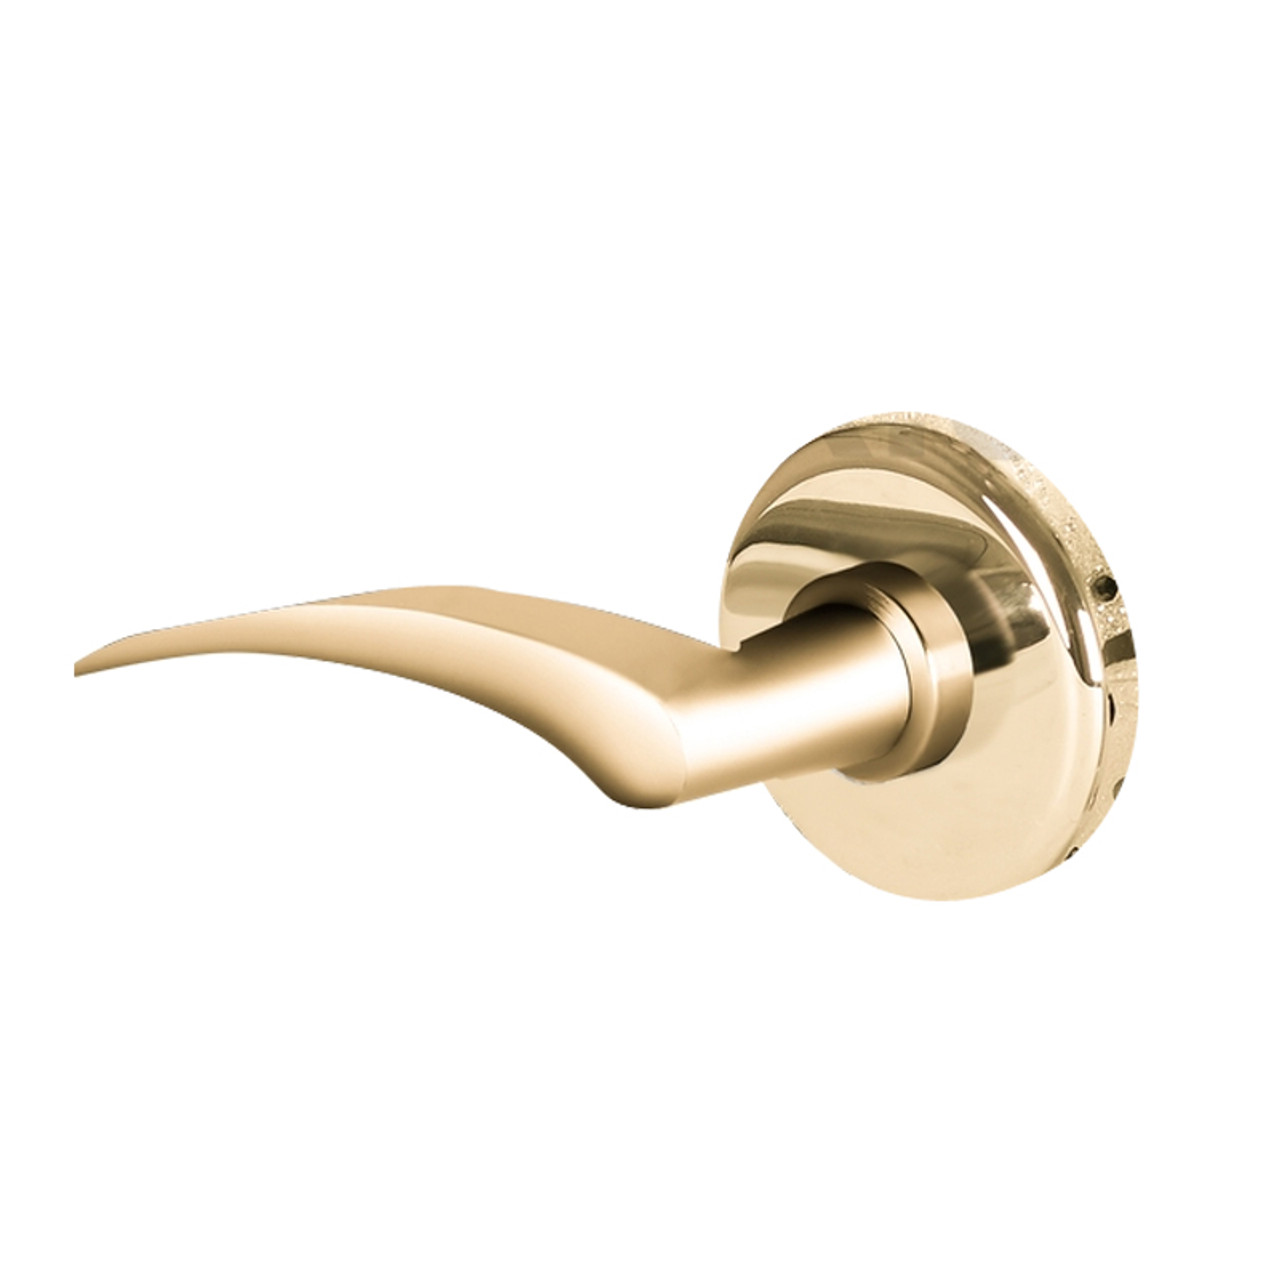 45H0LB17LR605 Best 40H Series Privacy with Deadbolt Heavy Duty Mortise Lever Lock with Gull Wing LH in Bright Brass